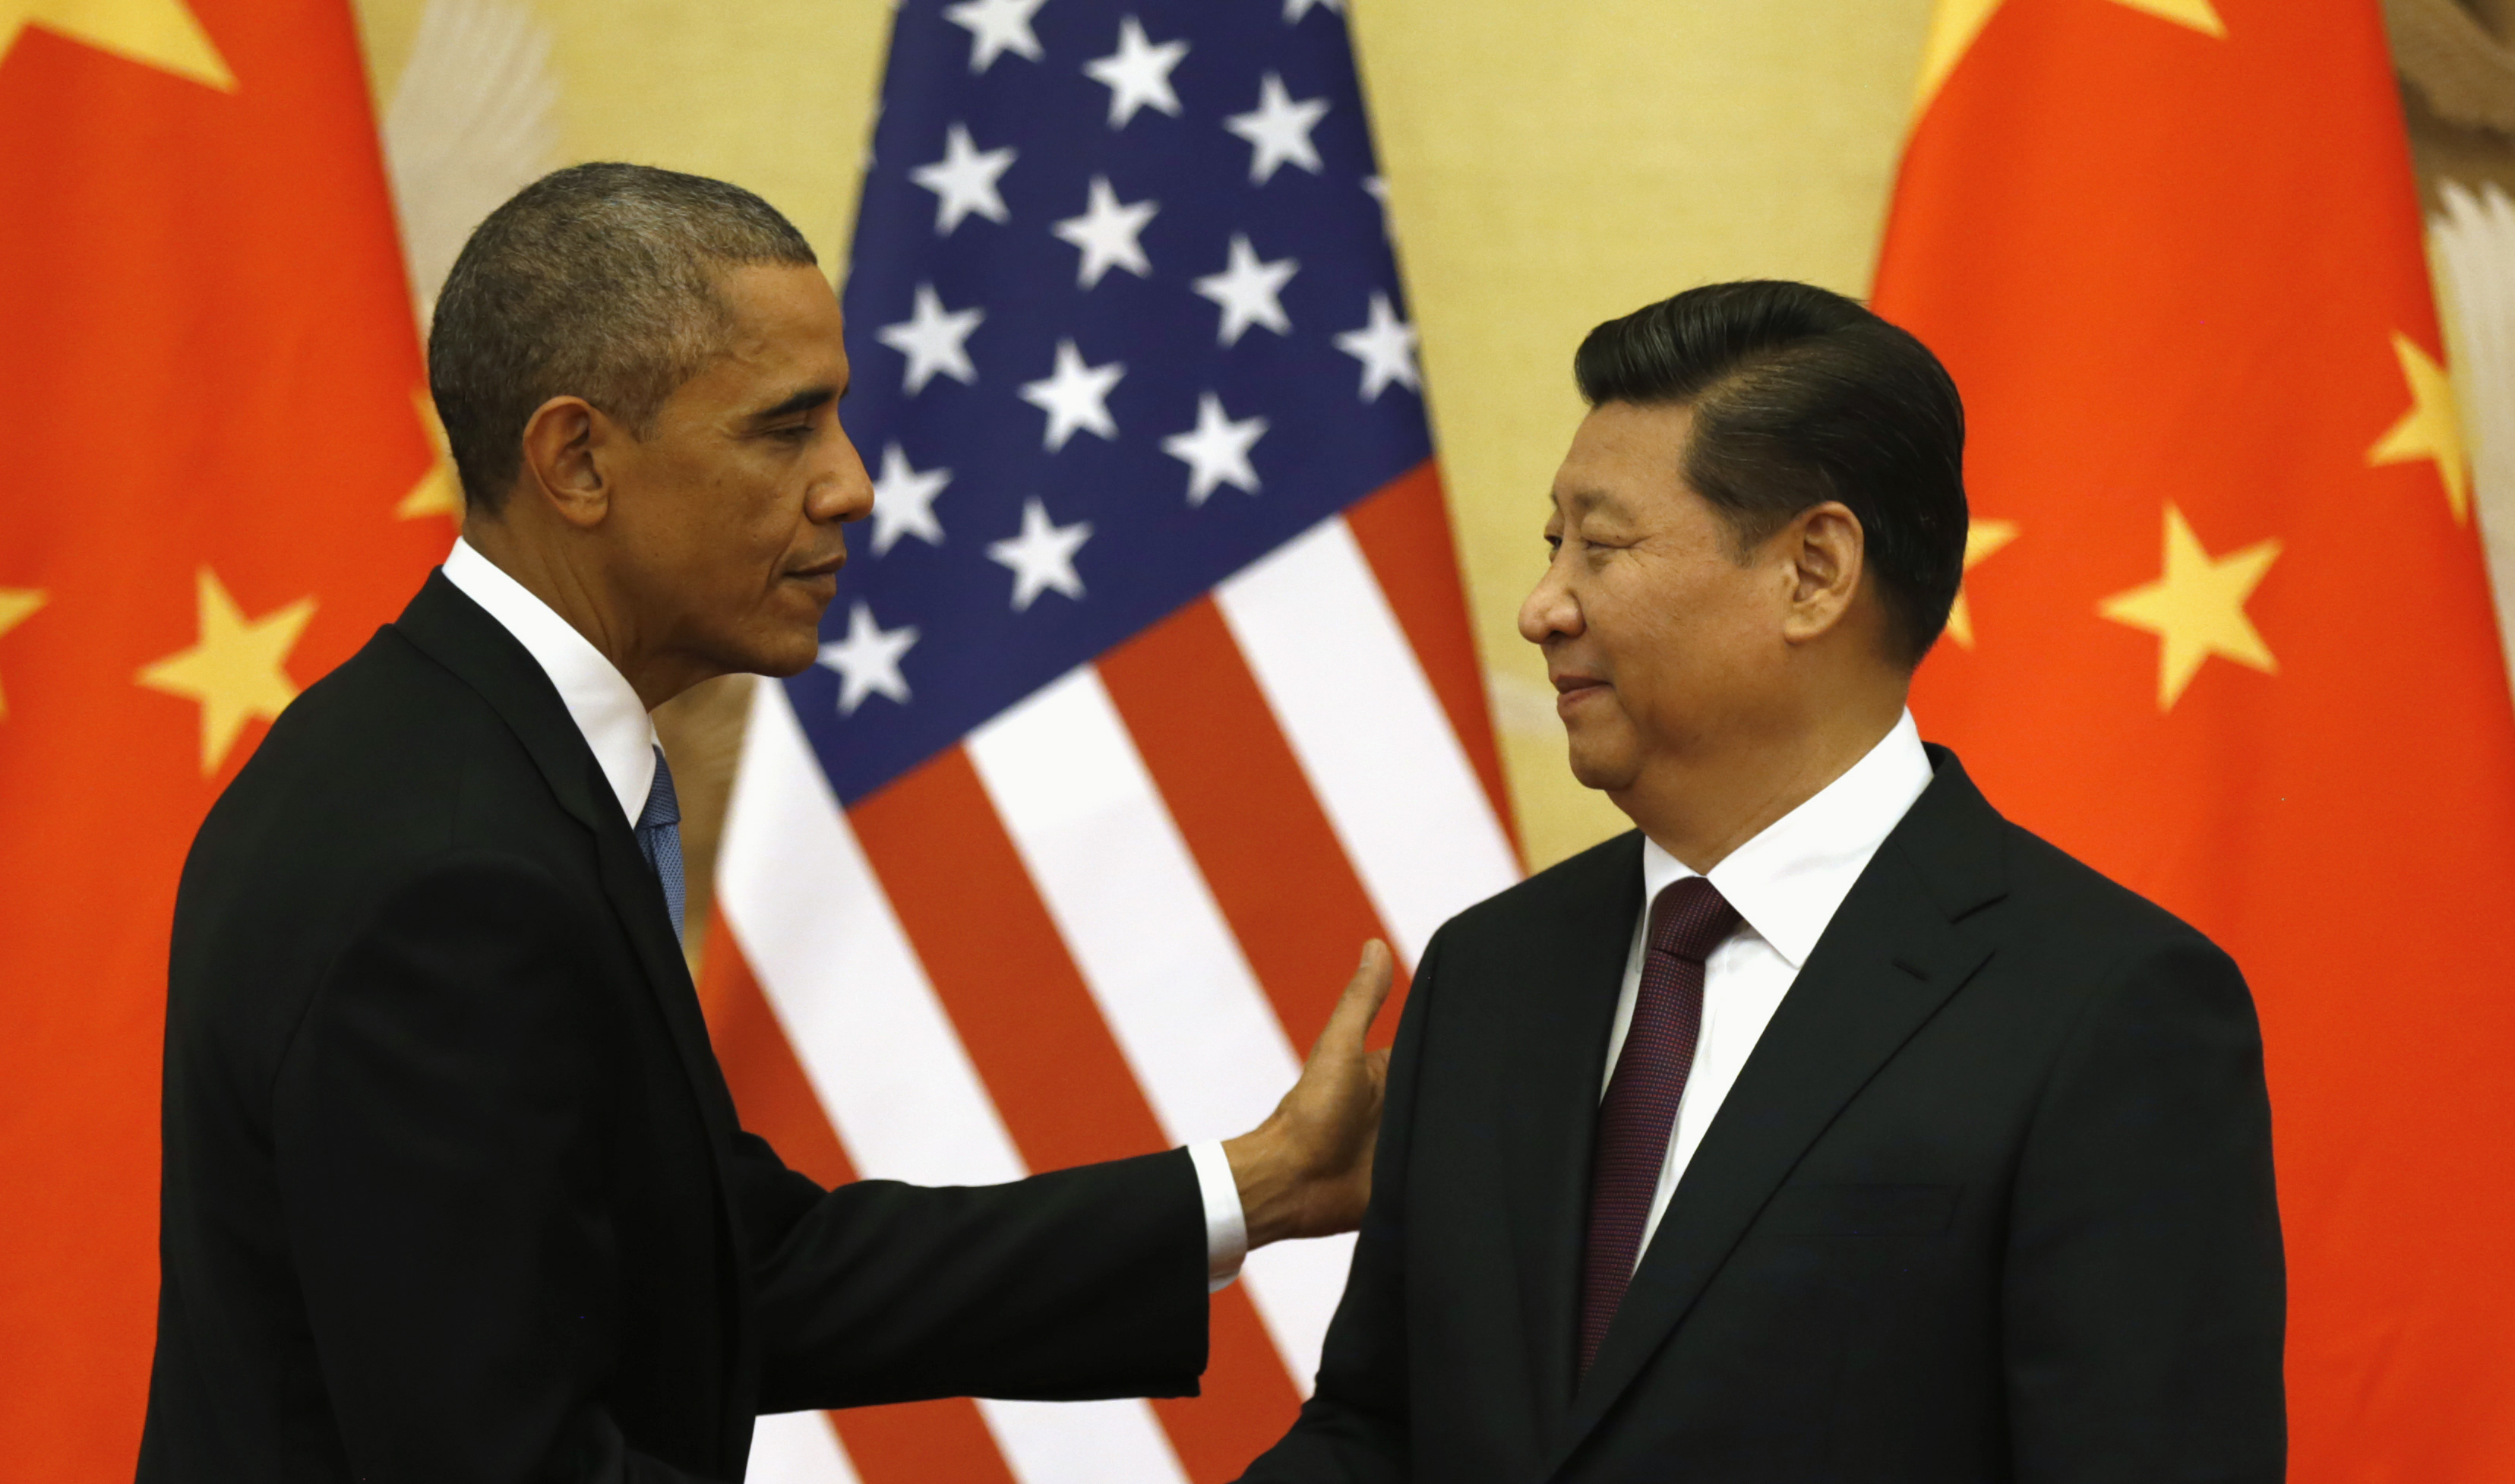 U.S. President Barack Obama pats Chinese President Xi Jinping on the shoulder at the end of their news conference in the Great Hall of the People in Beijing on Nov. 12, 2014 (Kevin Lamarque—Reuters)